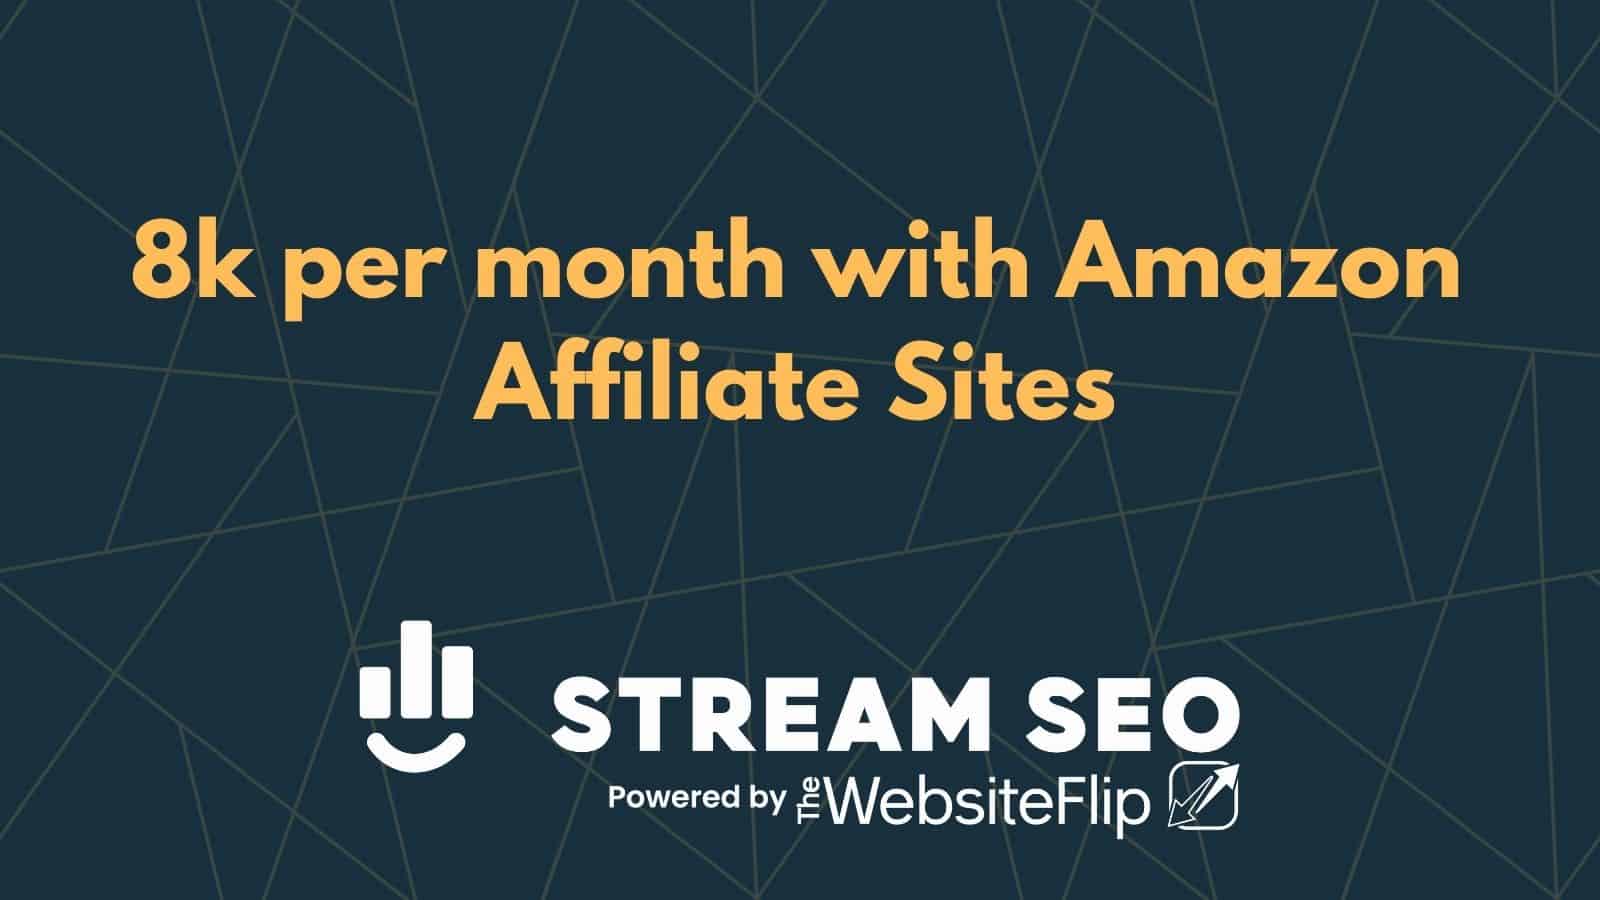 8k per month with Amazon Affiliate Sites